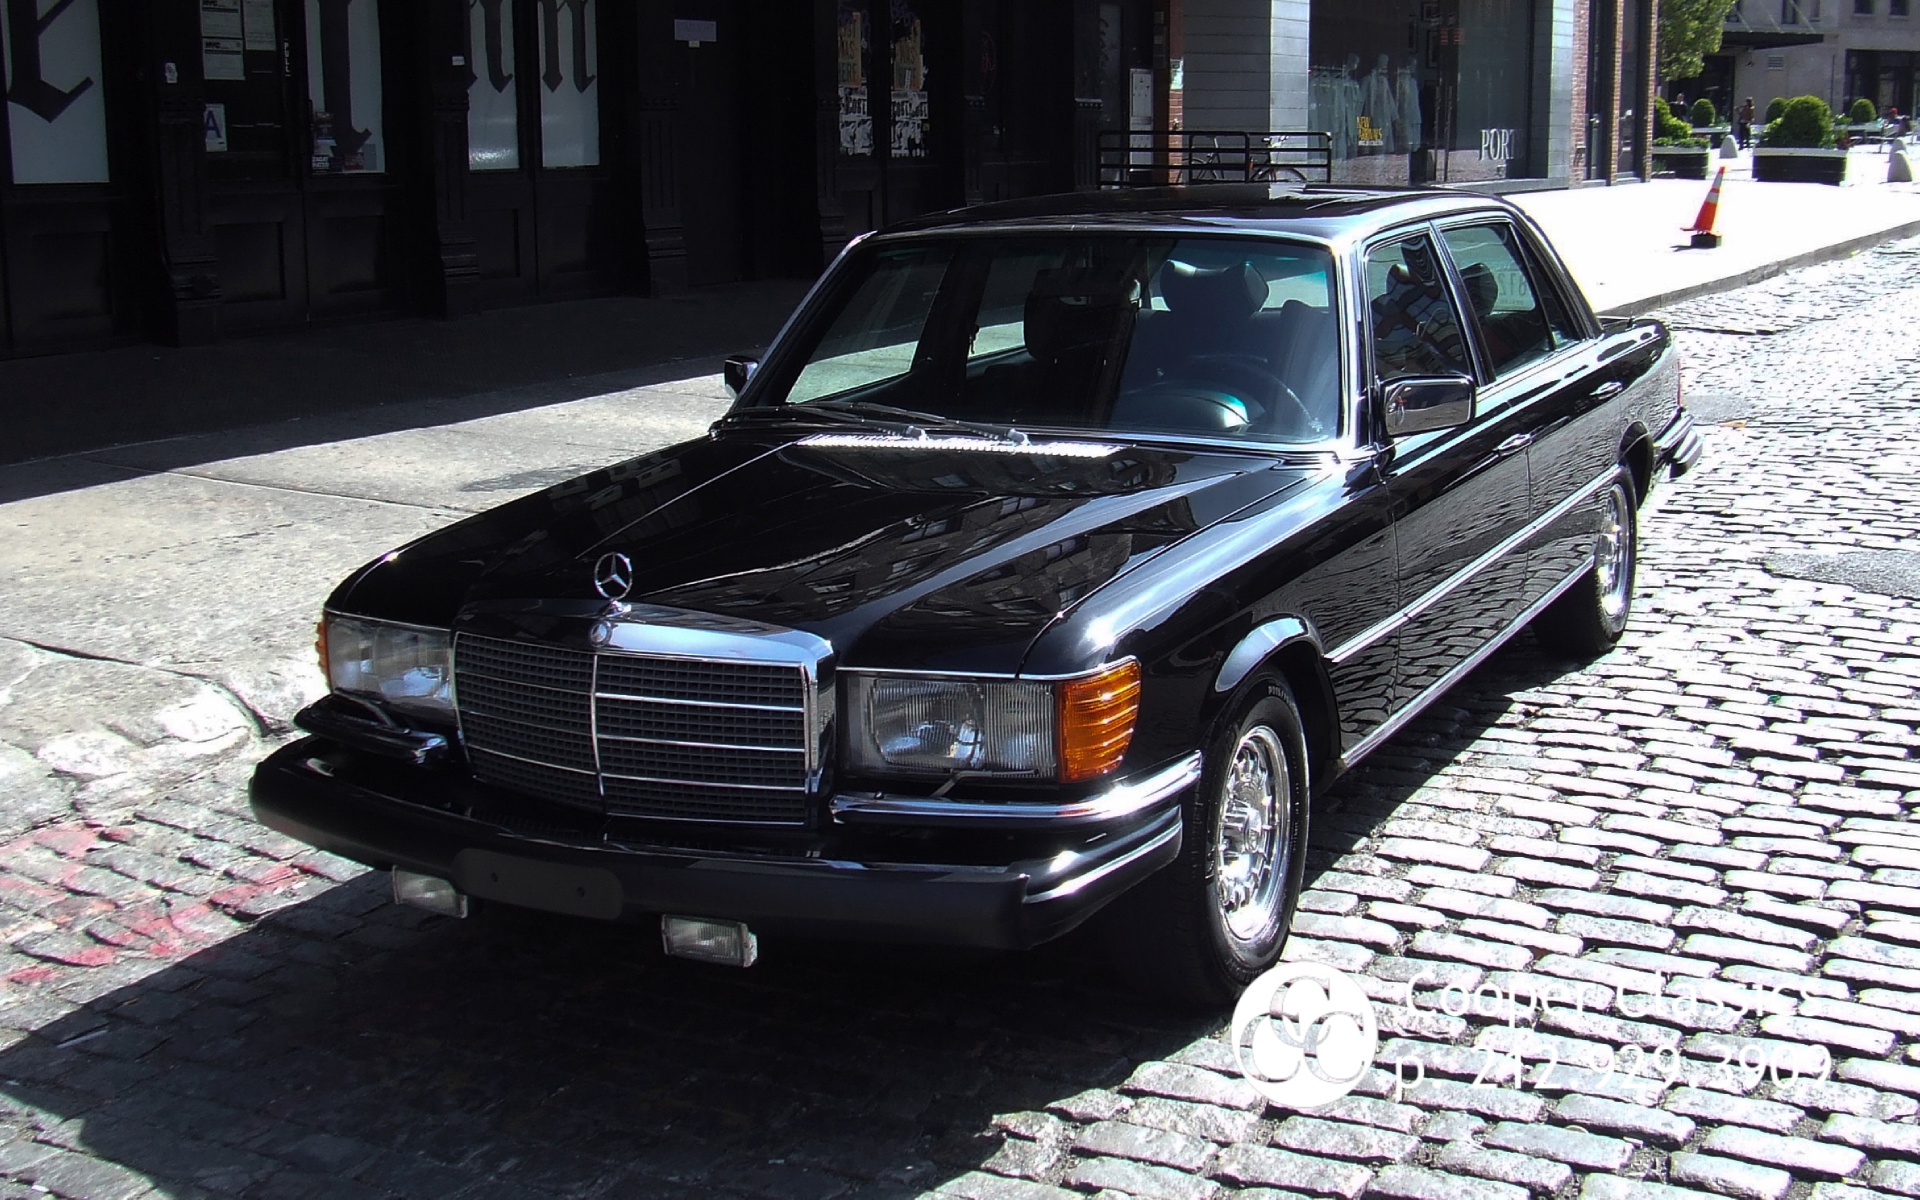 1979 Mercedes-Benz 450SEL 6.9 6.9 Stock # 450 for sale near New York, NY | NY Mercedes-Benz Dealer